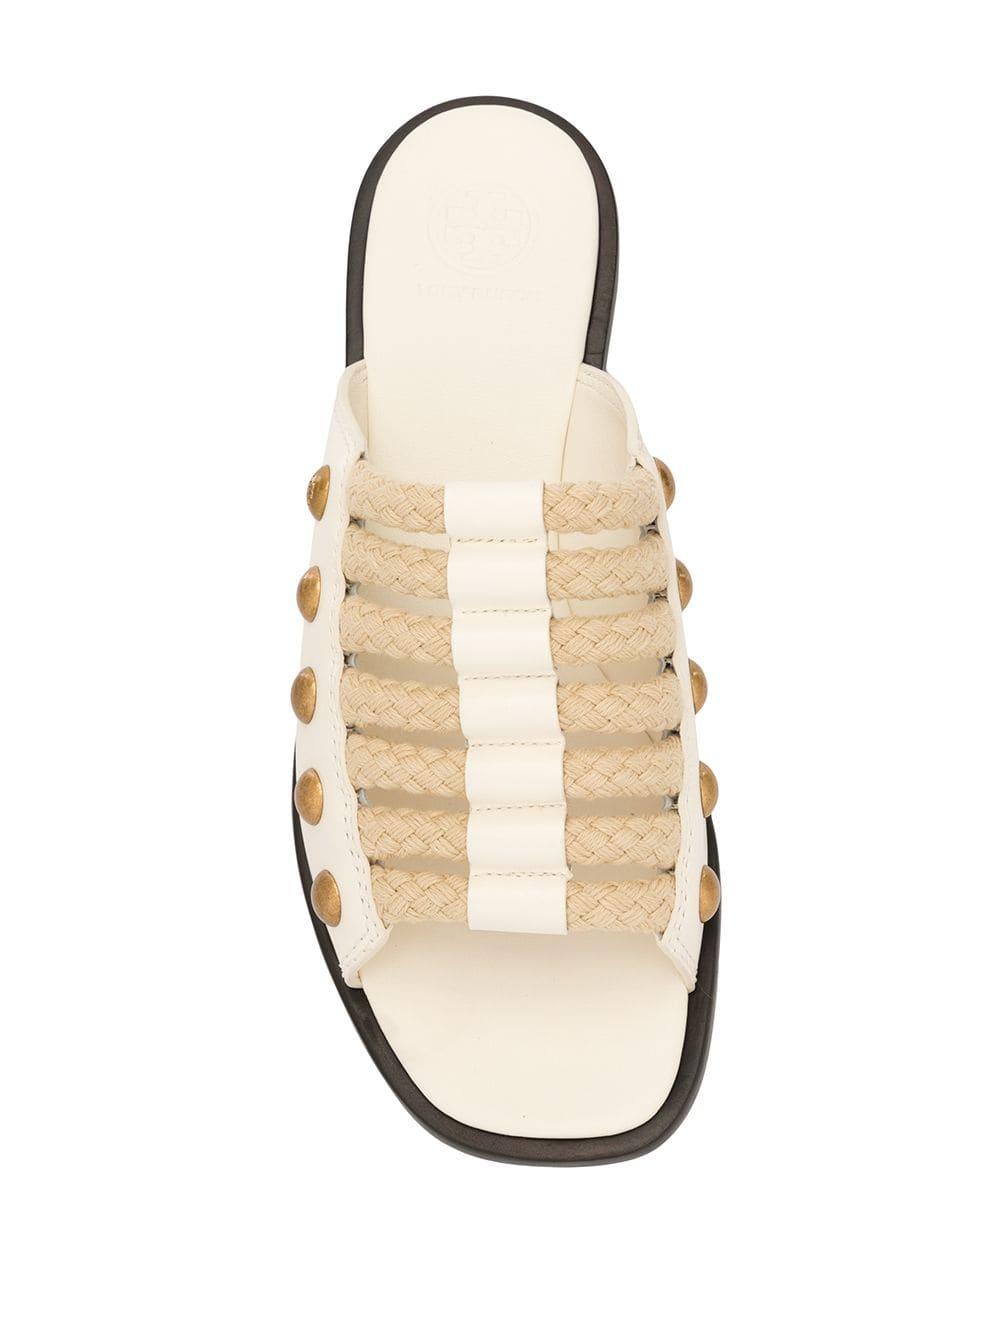 Tory Burch Blythe Rope Sliders in White | Lyst